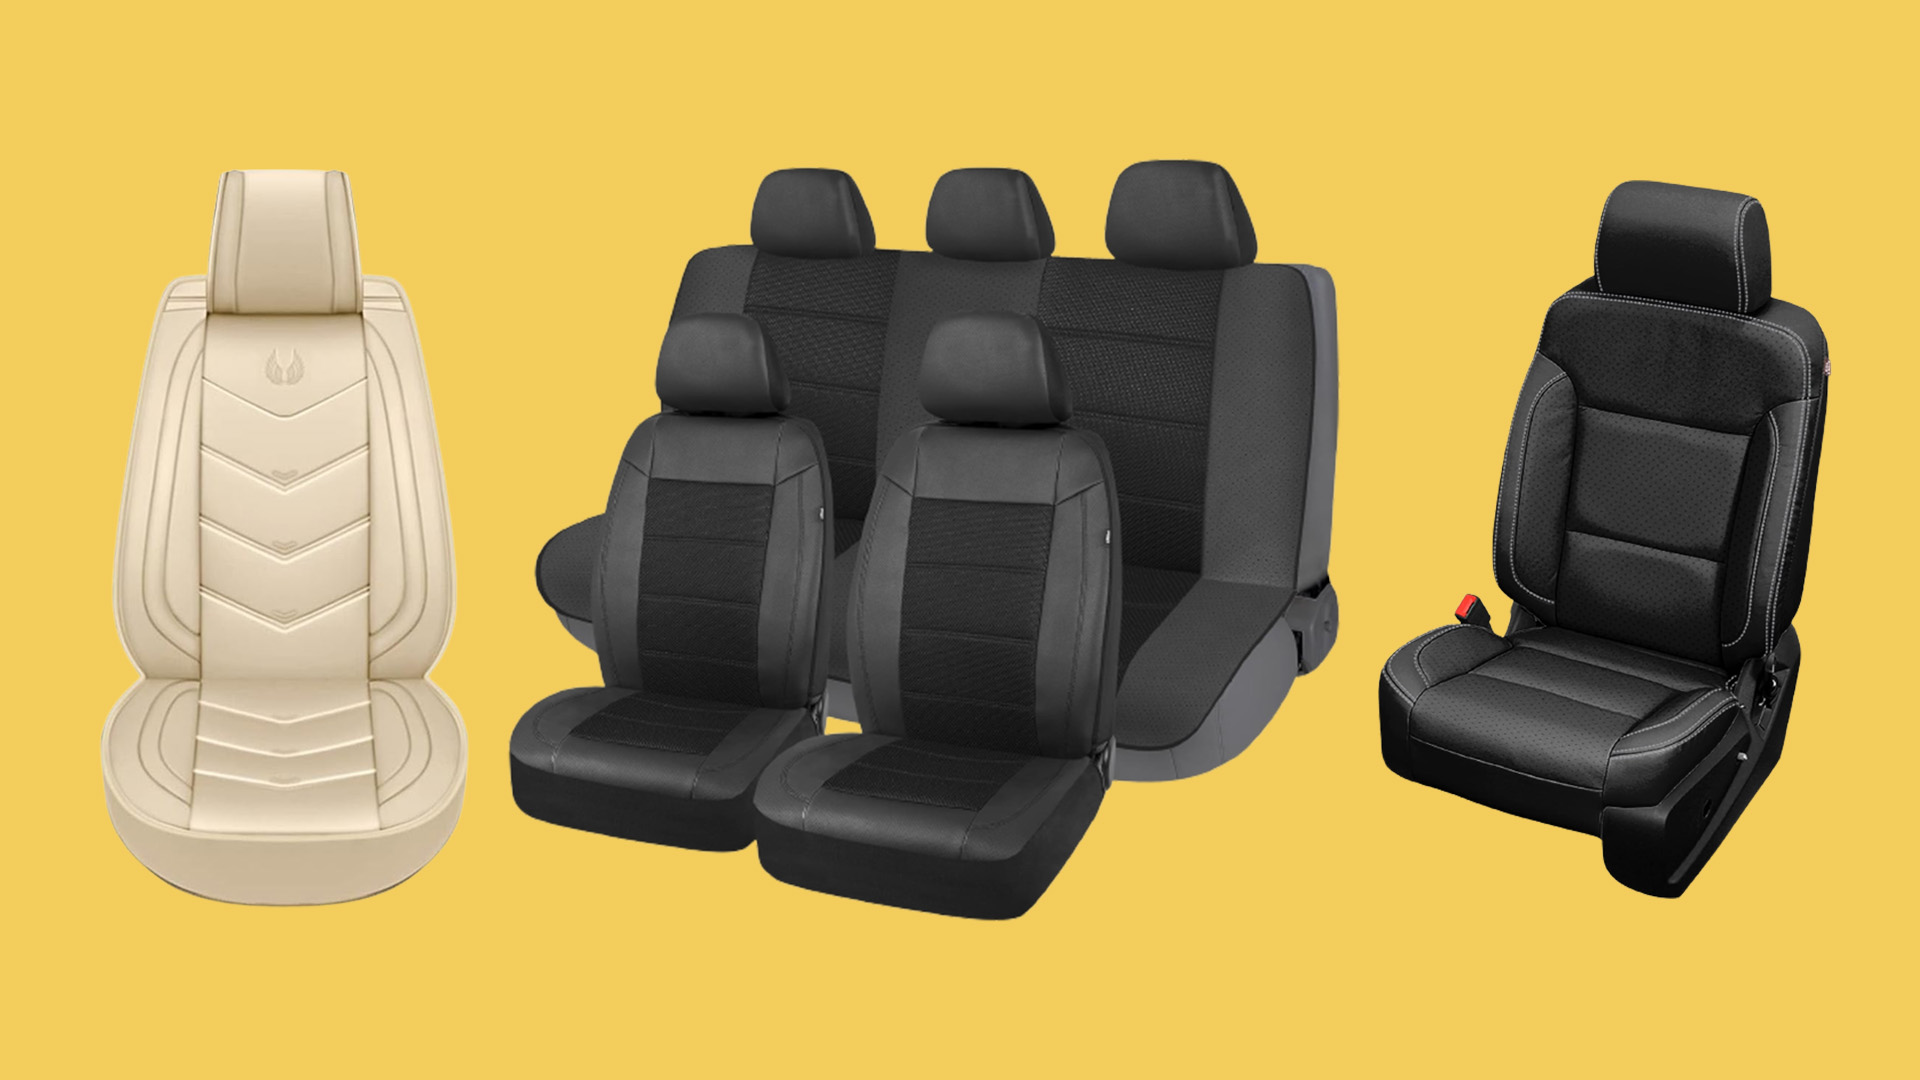 2021 Nissan Qashqai Vehicle Seat Covers & Car Seat Protectors for Pets